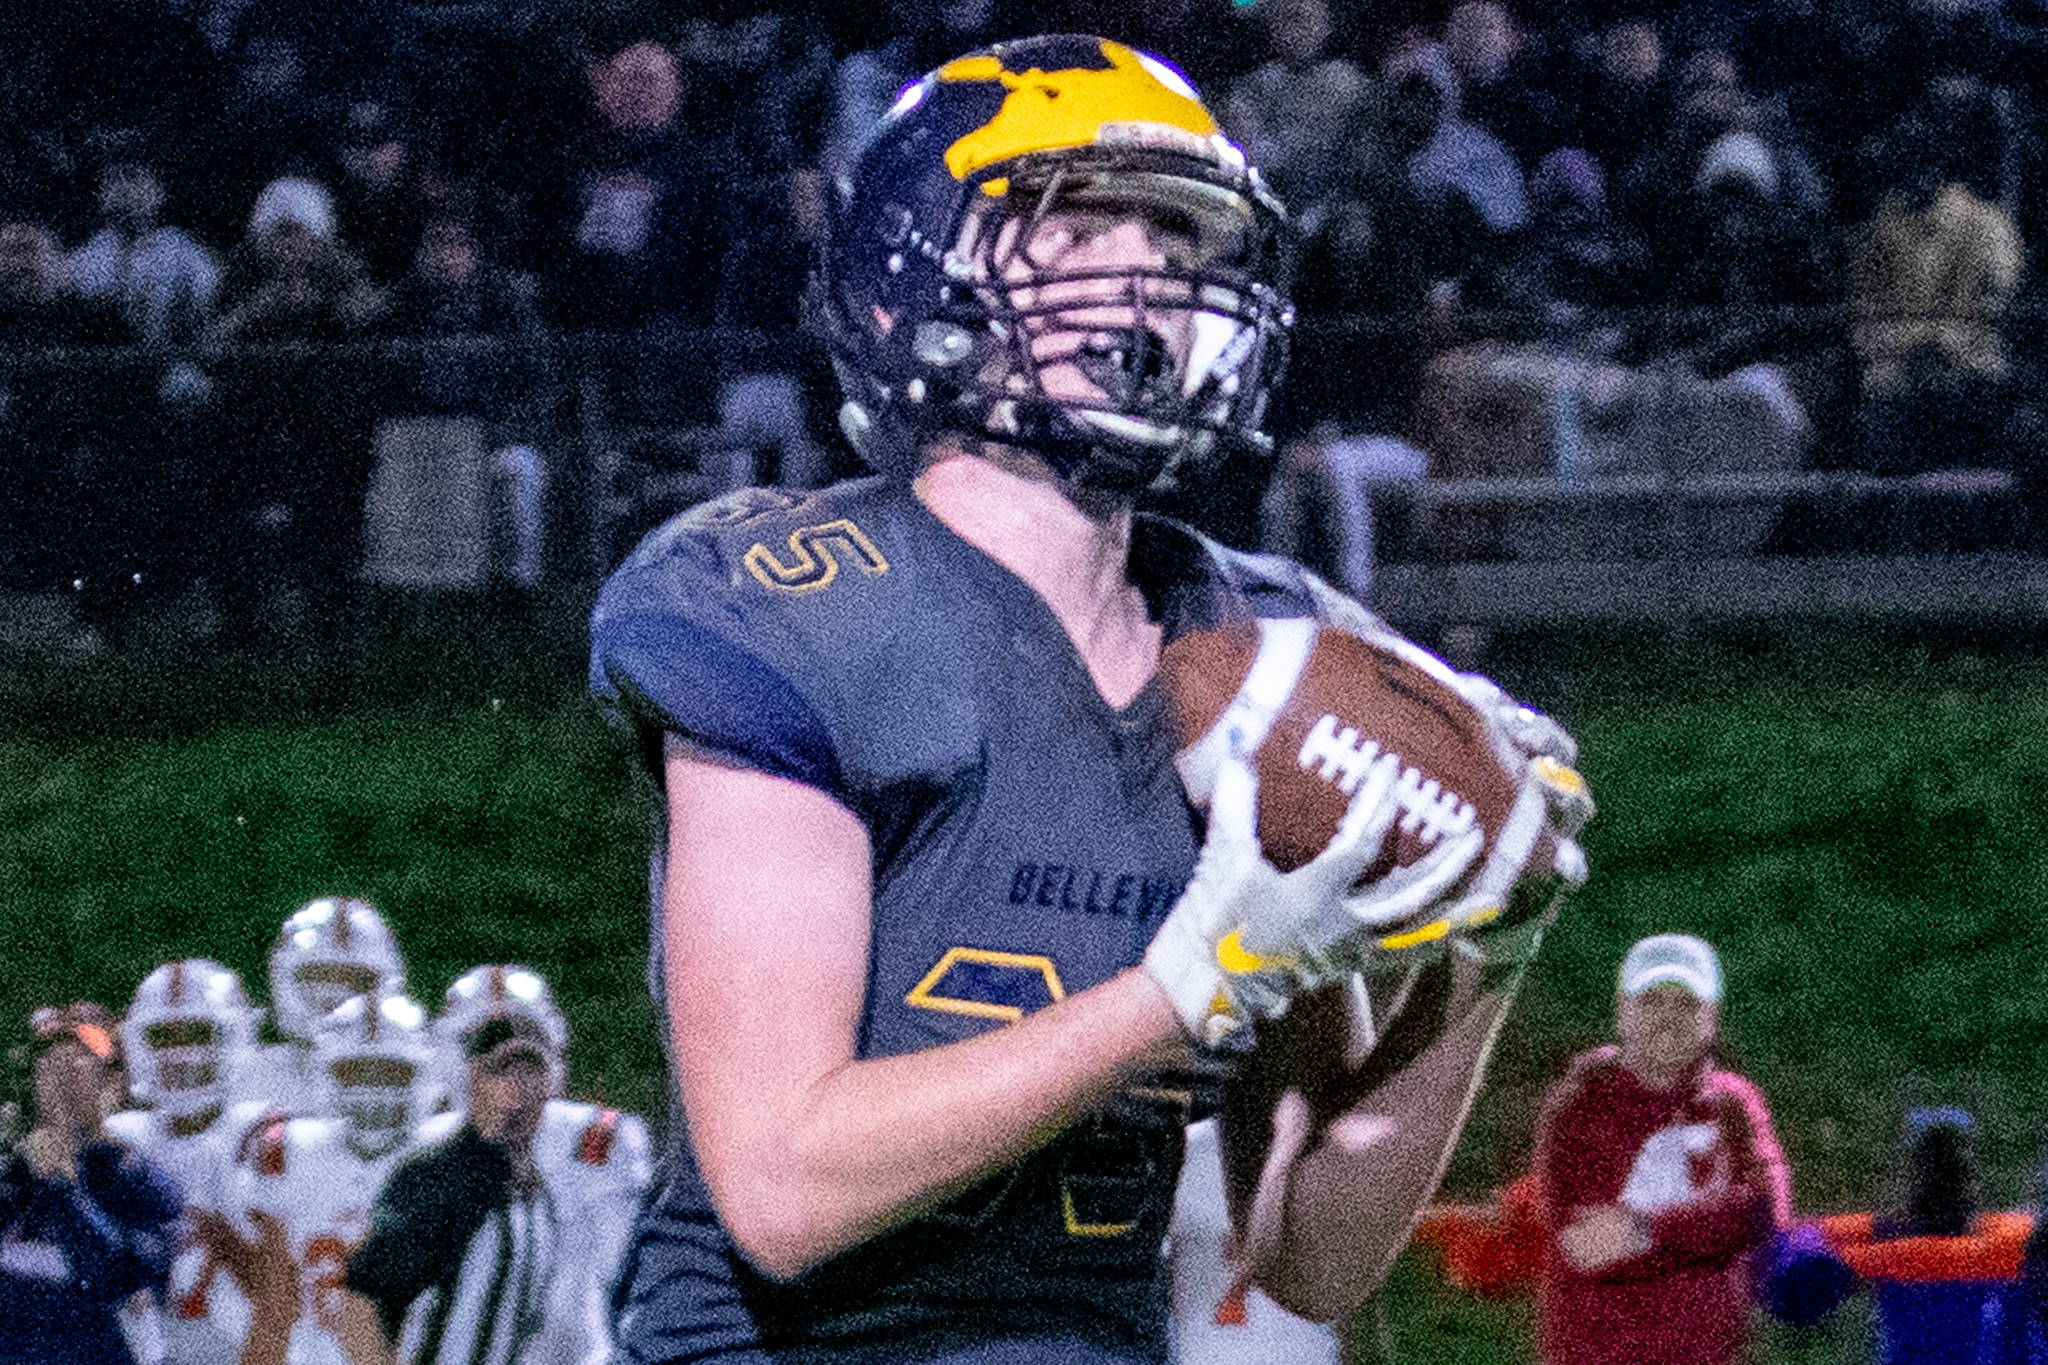 Bellevue airs it out in 31-14 victory over Lakes